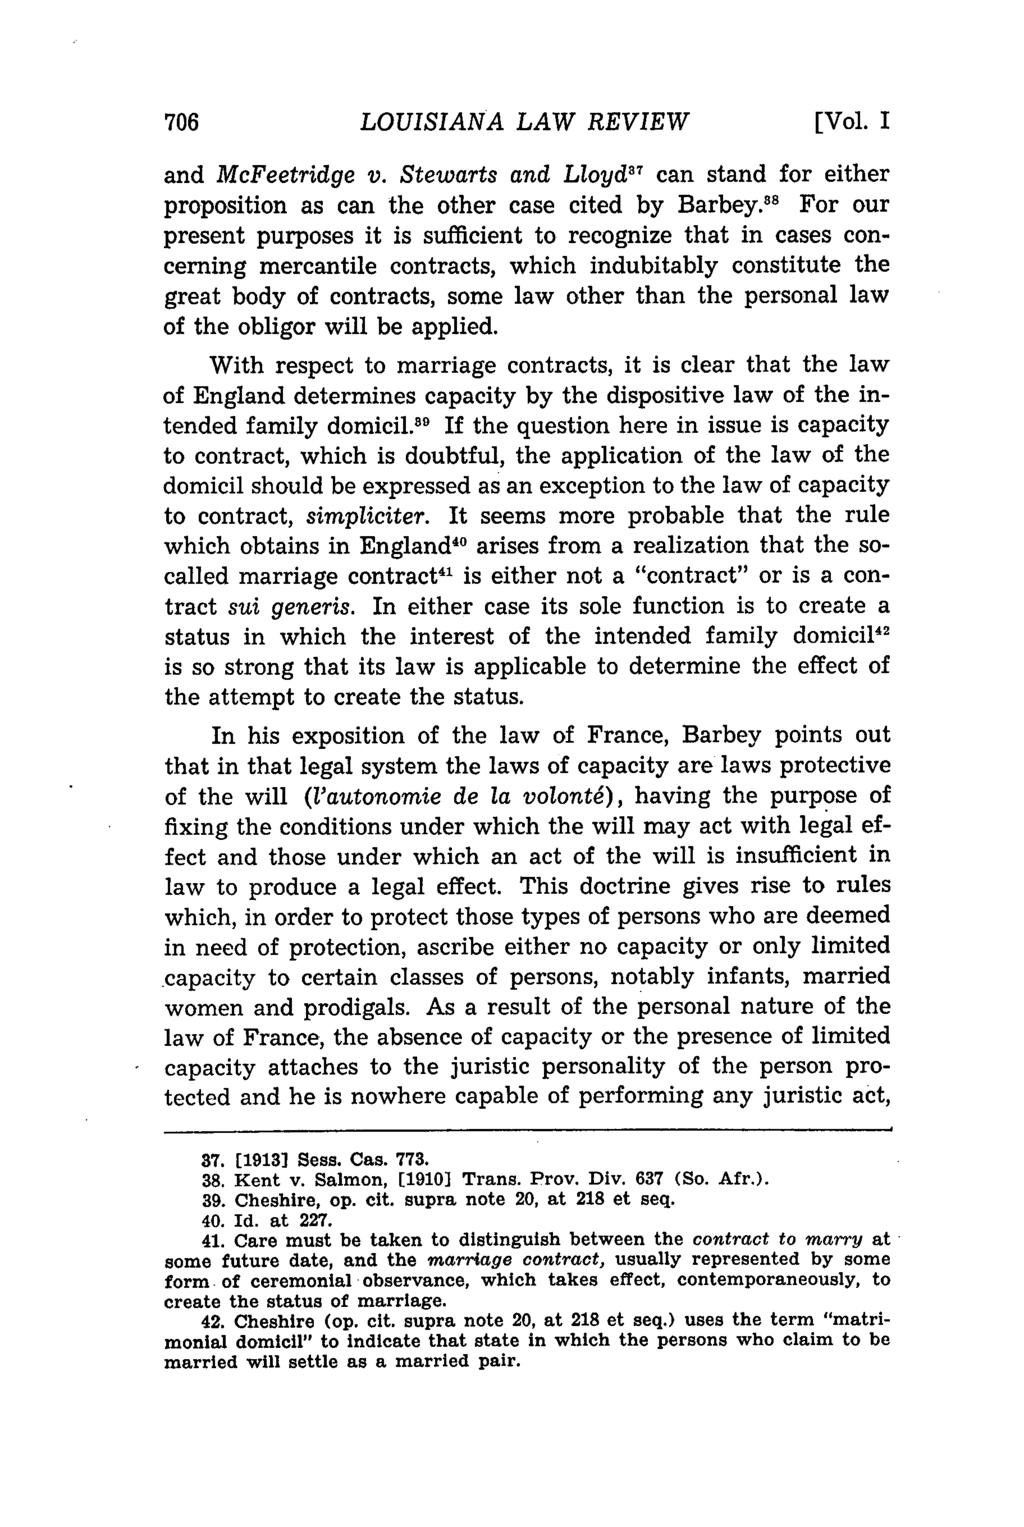 LOUISIANA LAW REVIEW [Vol. I and McFeetridge v. Stewarts and Lloyd 7 can stand for either proposition as can the other case cited by Barbey.